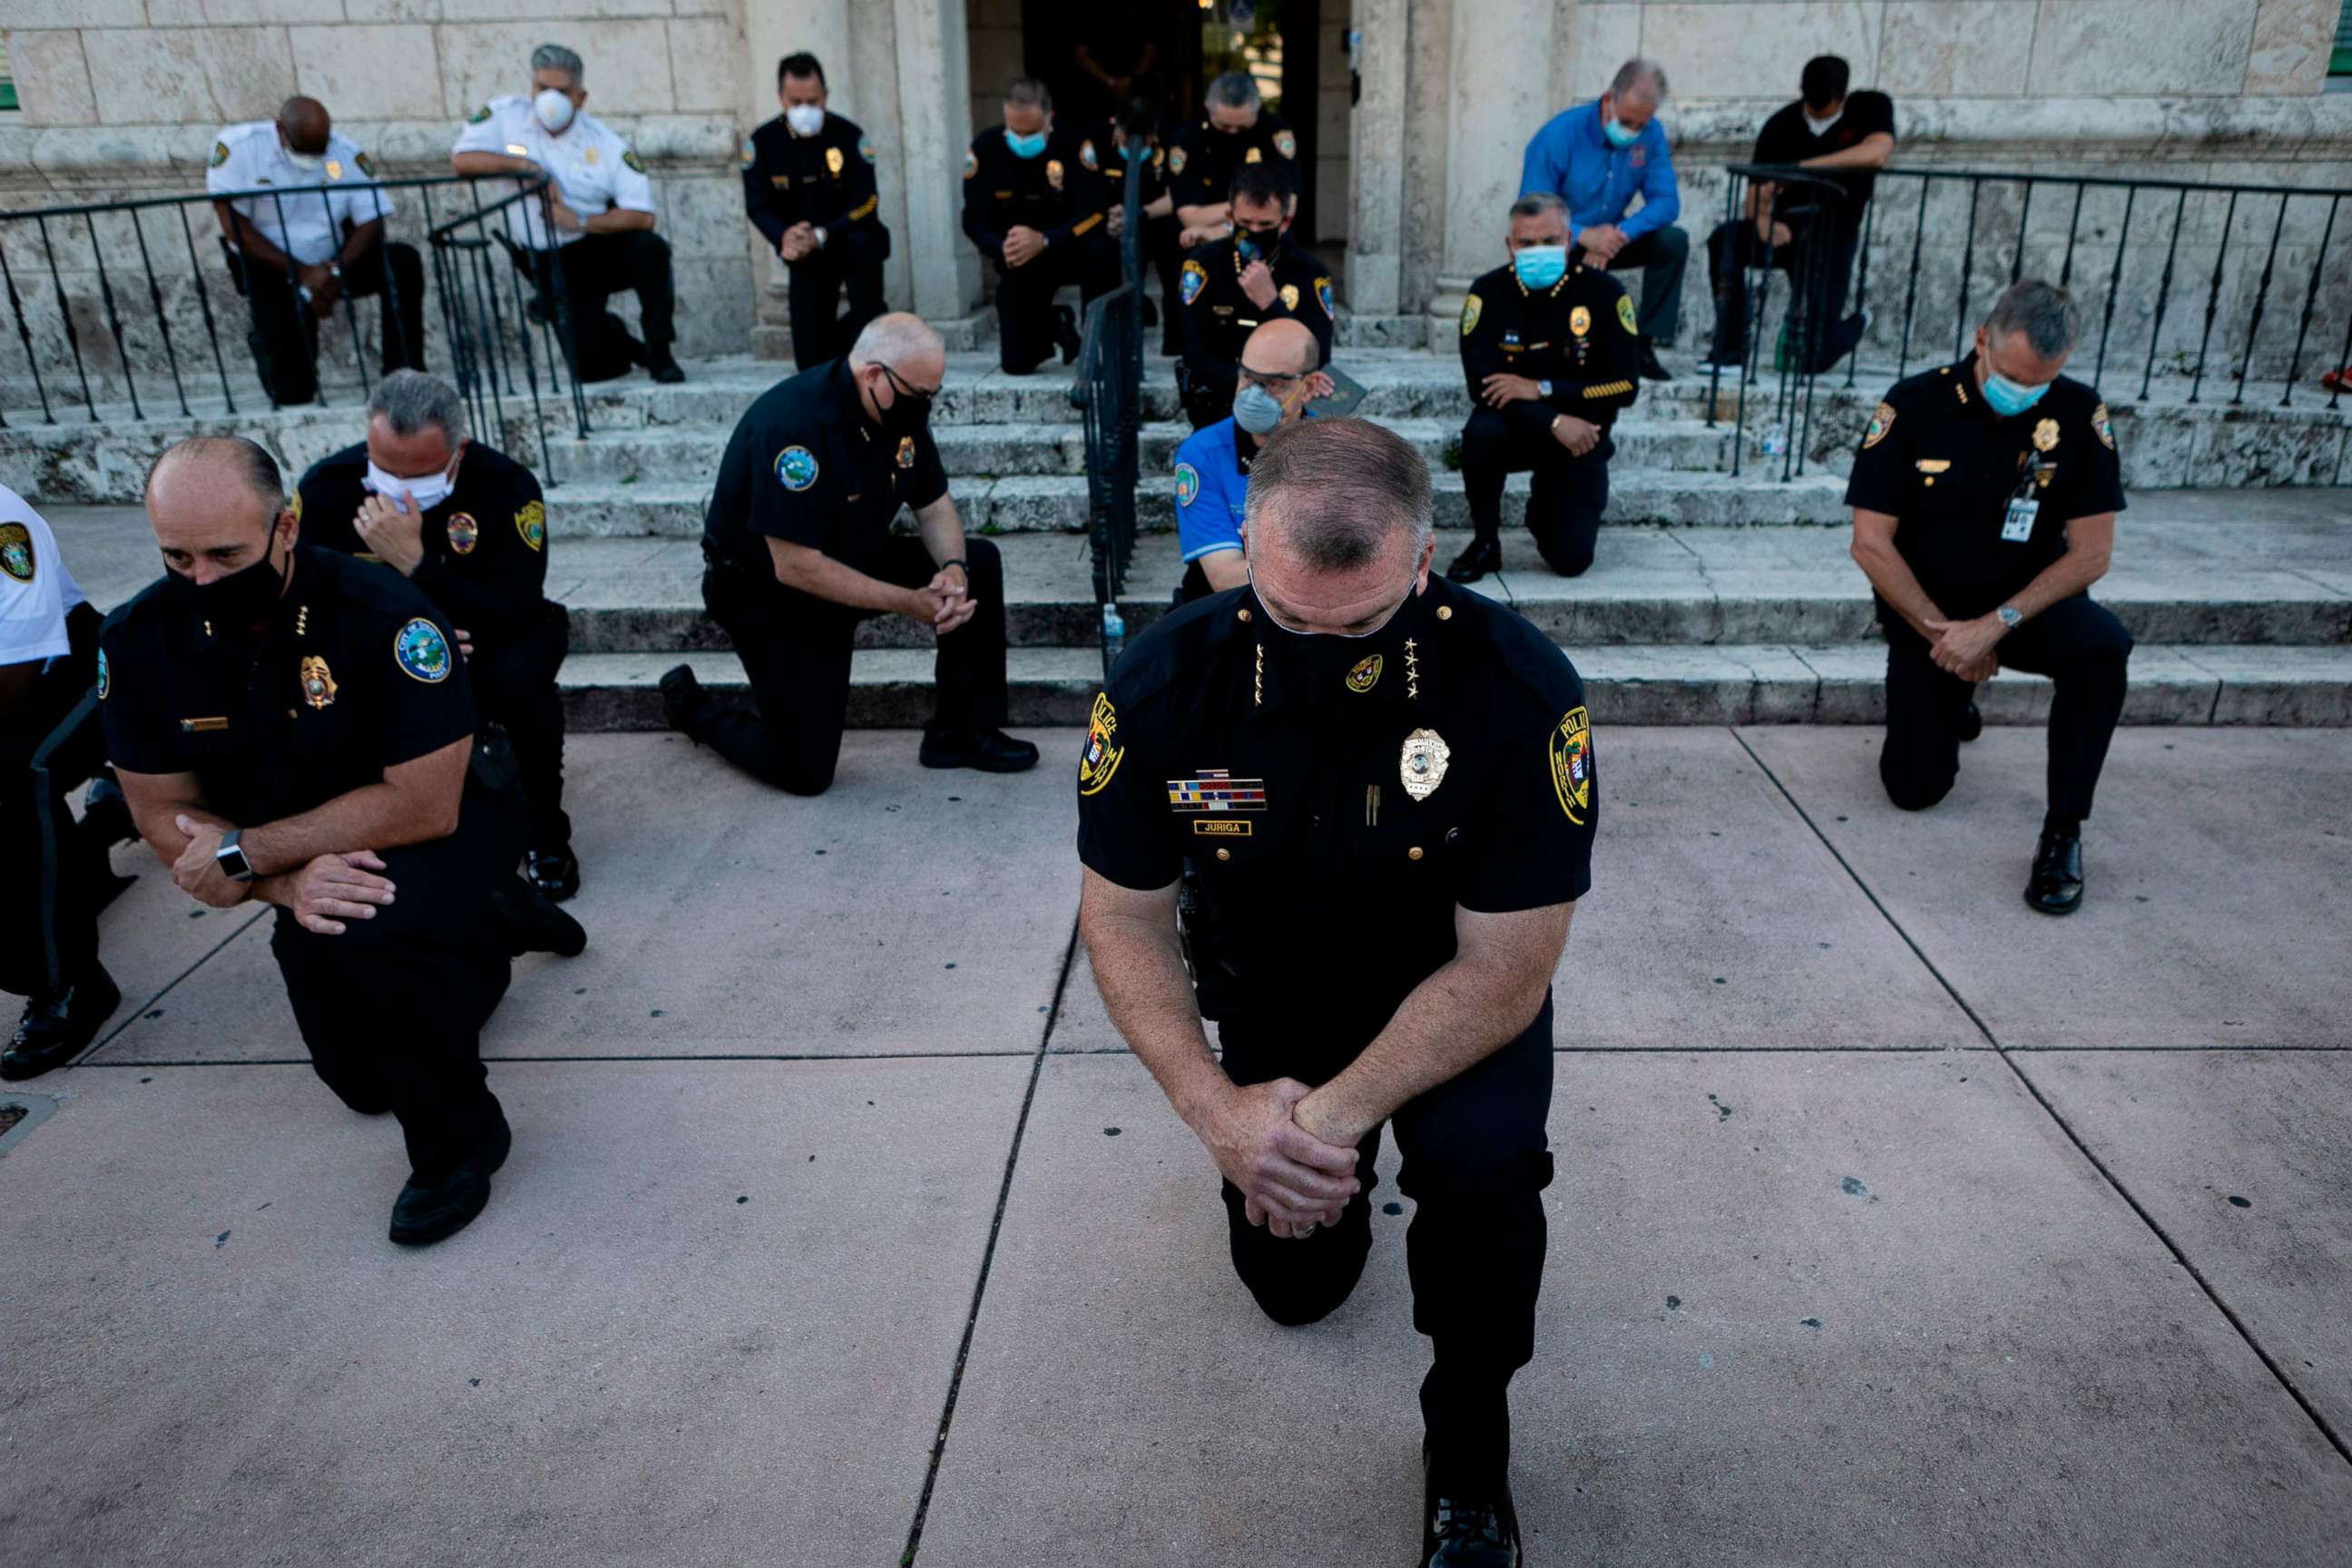 PHOTO: Police officers kneel during a rally in Coral Gables, Florida, May 30, 2020, in response to the recent death of George Floyd, an unarmed black man who died while being arrested and pinned to the ground by a Minneapolis police officer.